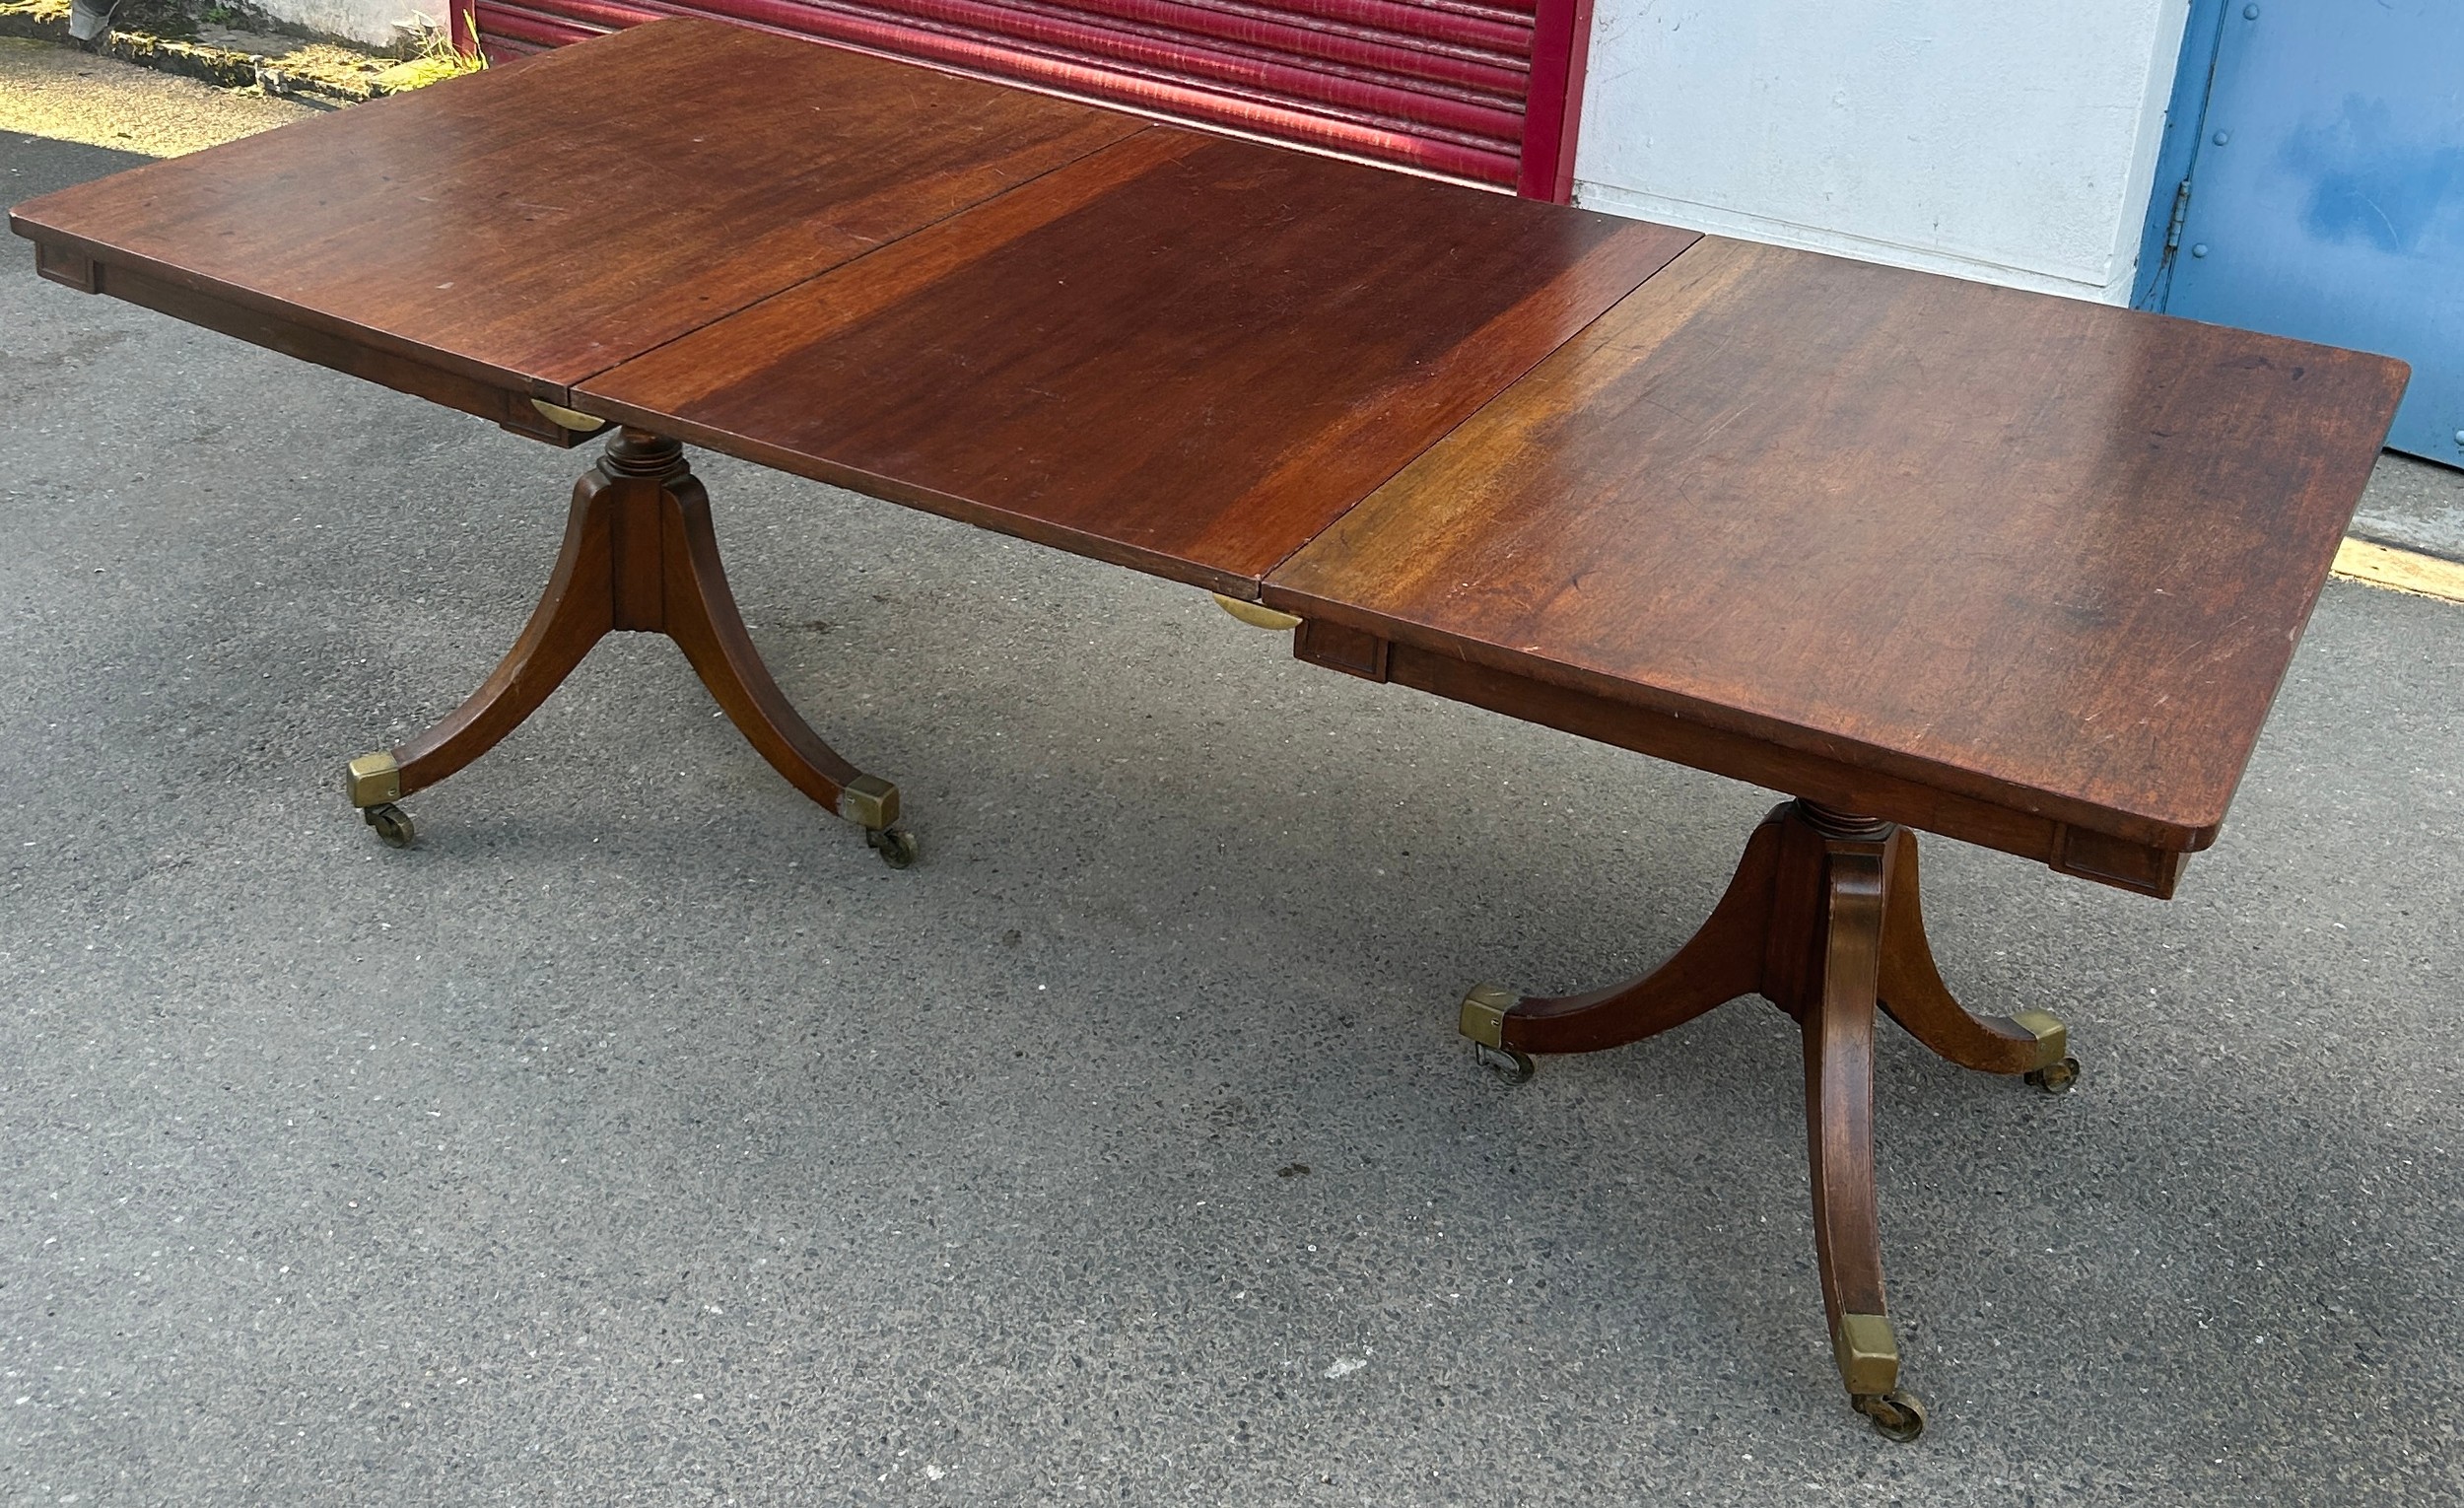 AN EARLY 19TH CENTURY EXTENDABLE DINING TABLE, Possibly a marriage with the legs being earlier